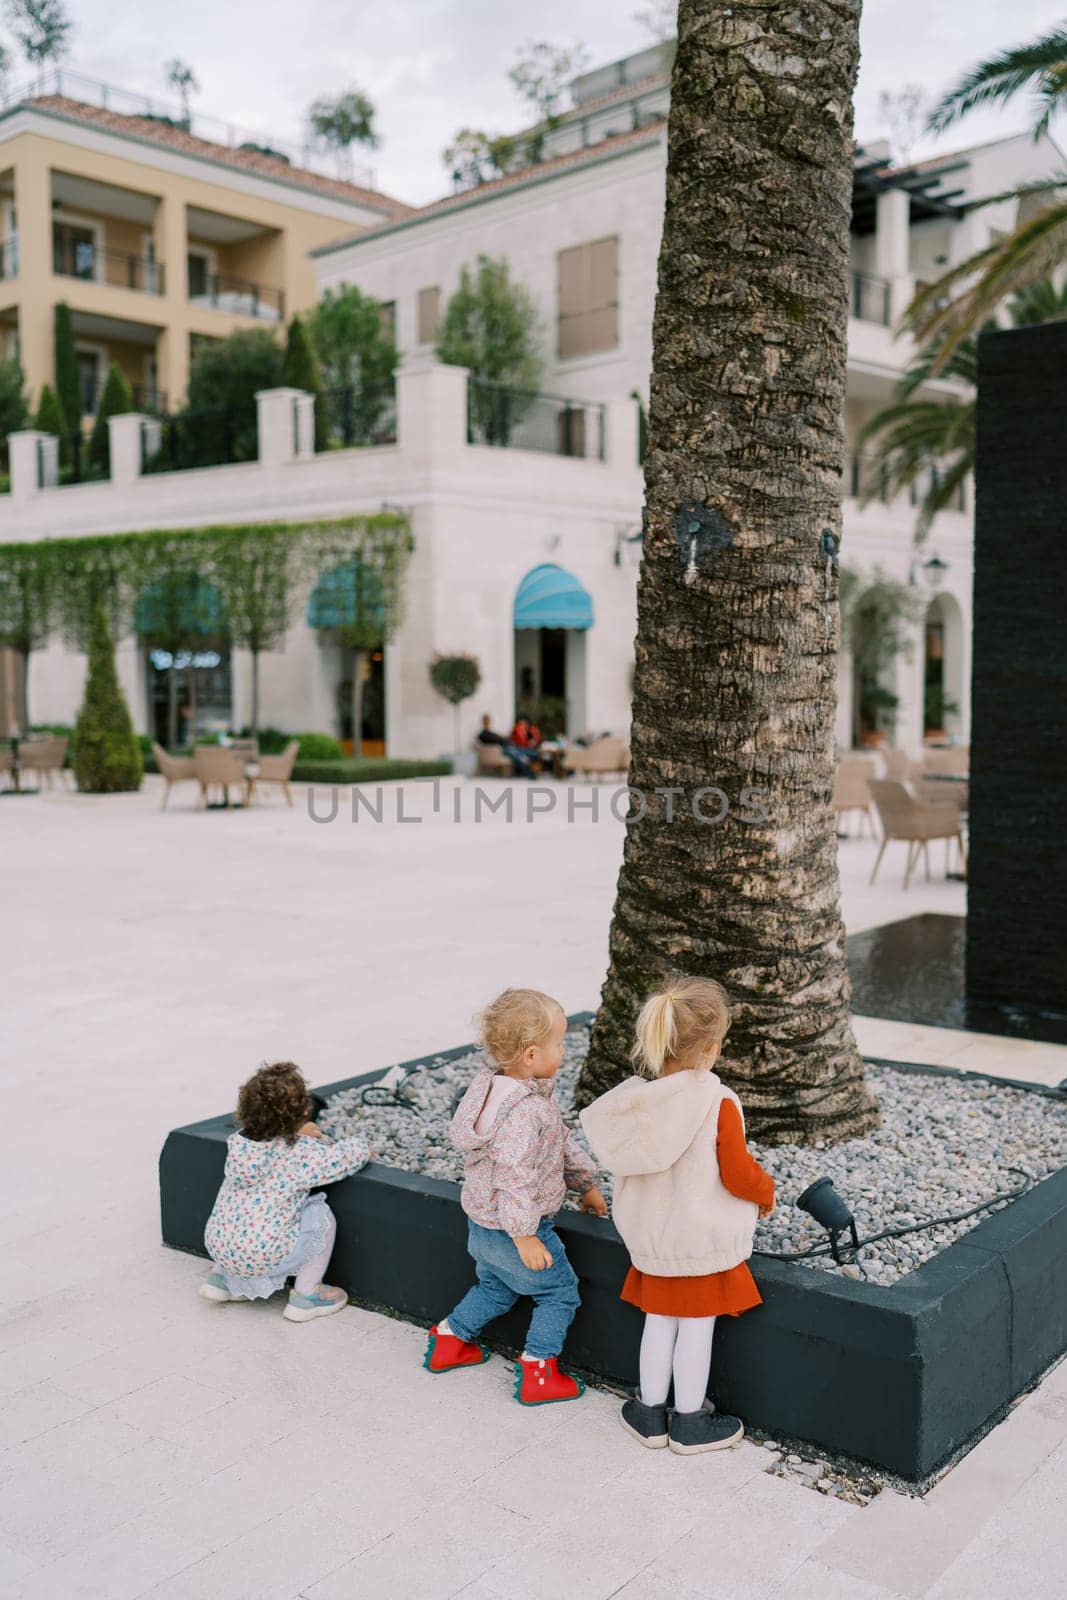 Little girls stand near a flowerbed with a growing palm tree and look at the pebbles in it. Back view by Nadtochiy